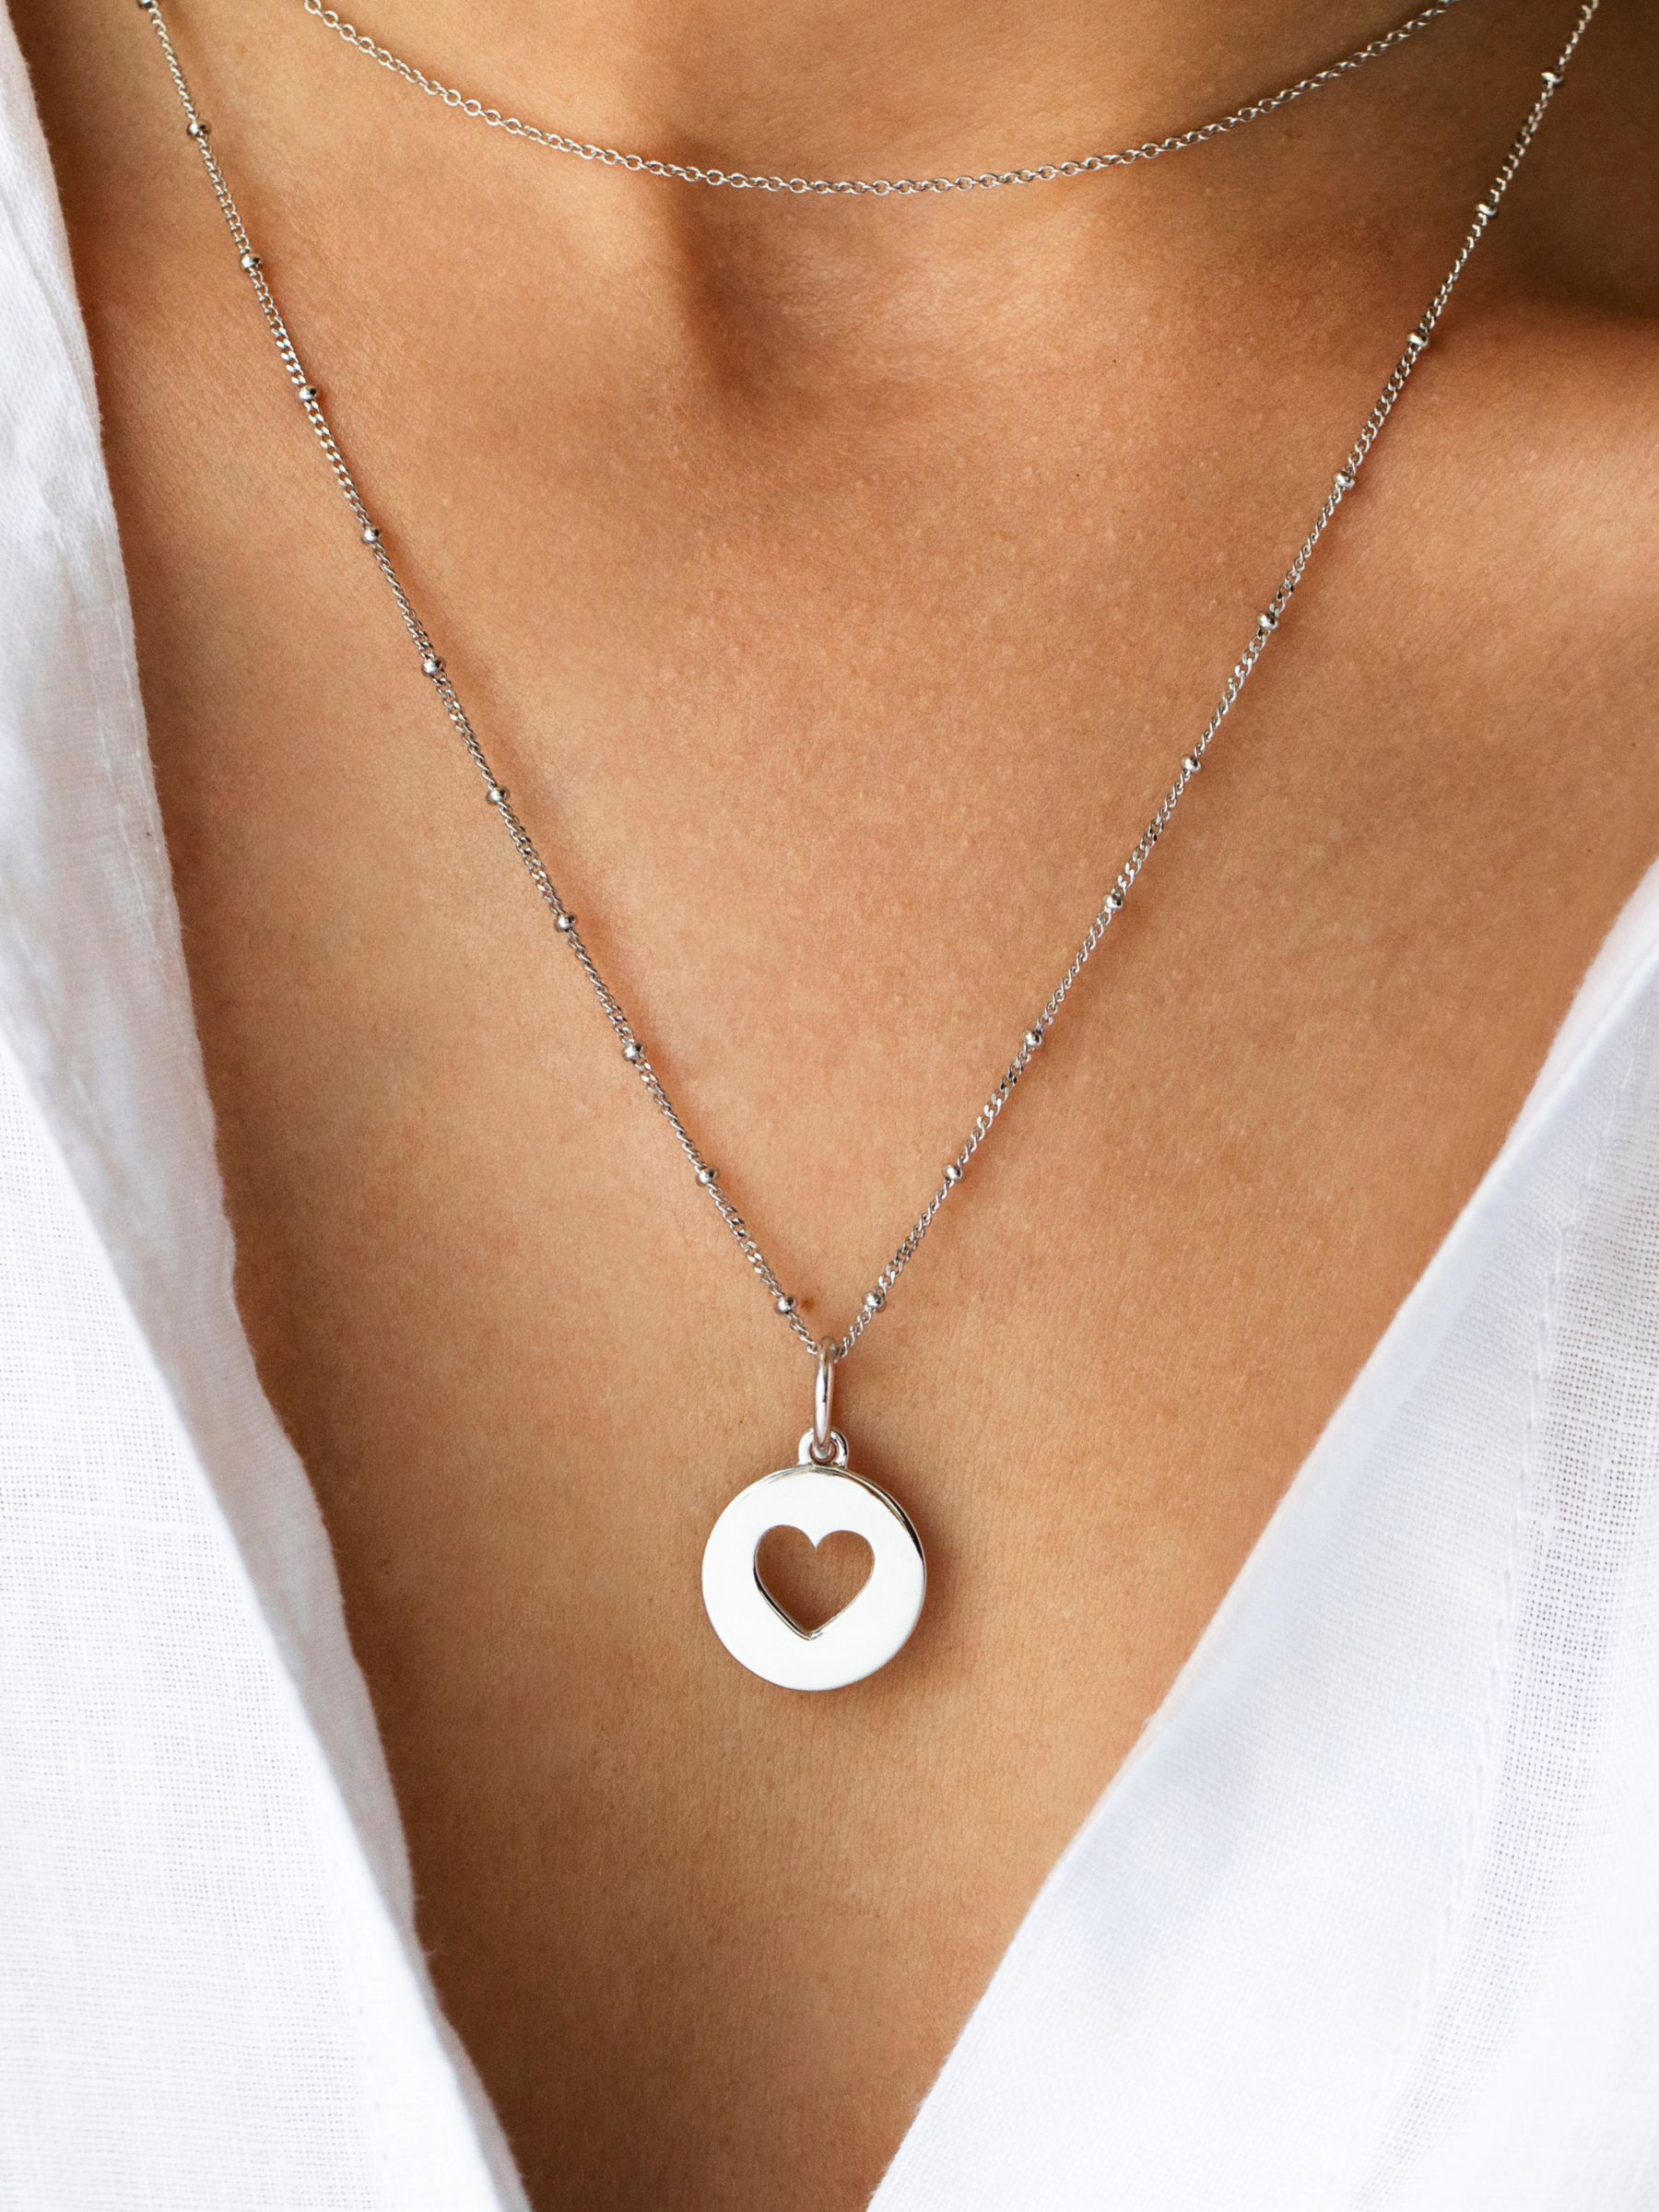 Buy Recognised Heart Popon Bobble Chain Pendant Necklace Online at johnlewis.com